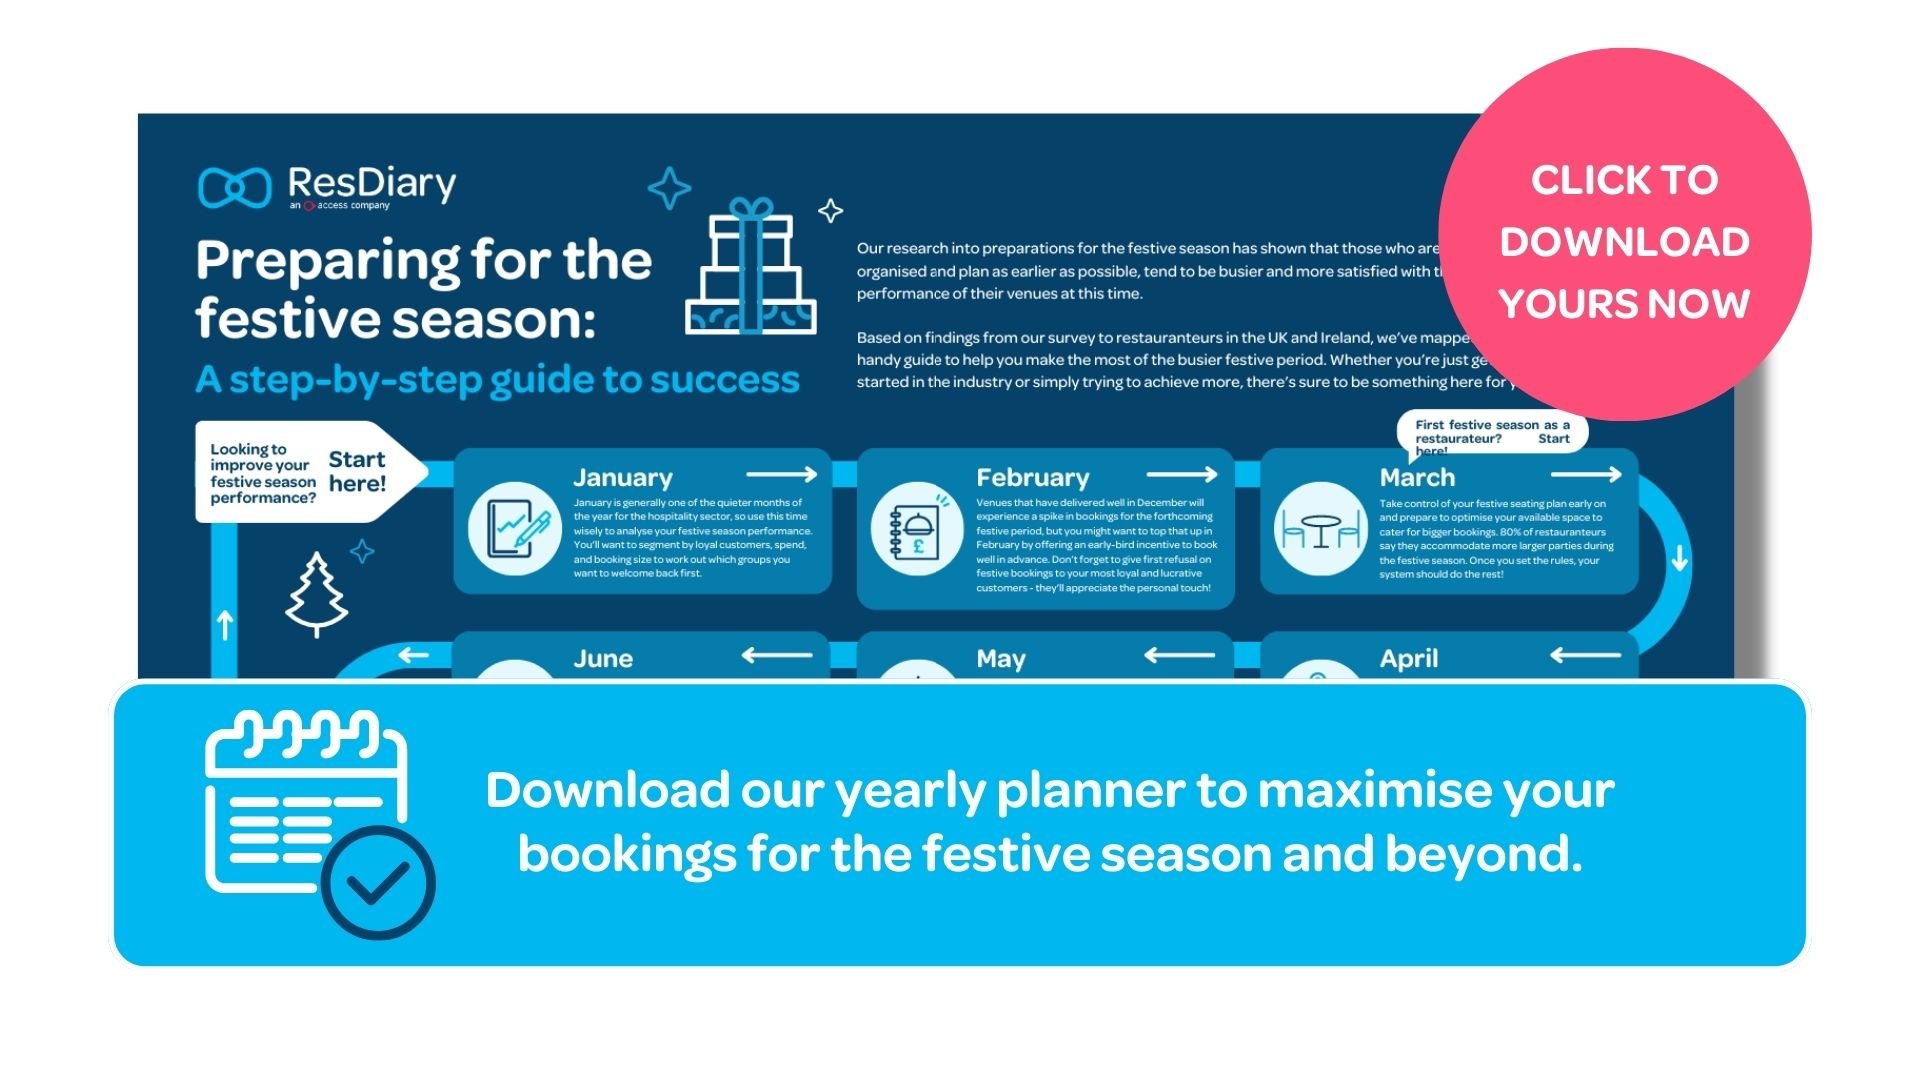  Call to action to download the free festive season planning calendar for restaurants